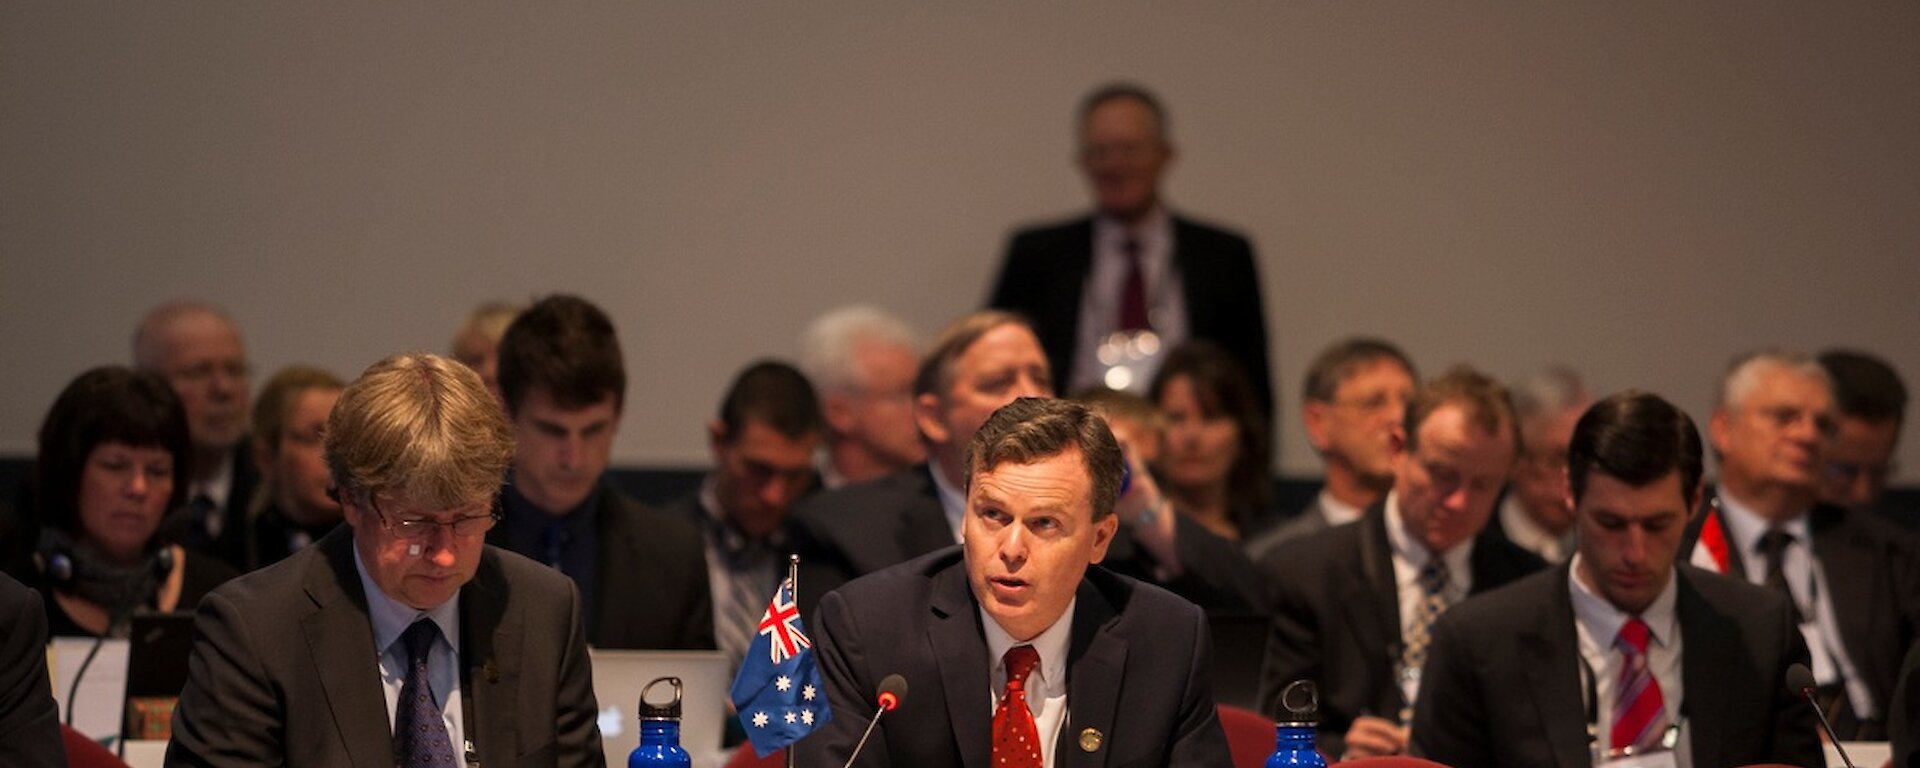 Greg French, head of the Australian delegation, speaking at the meeting